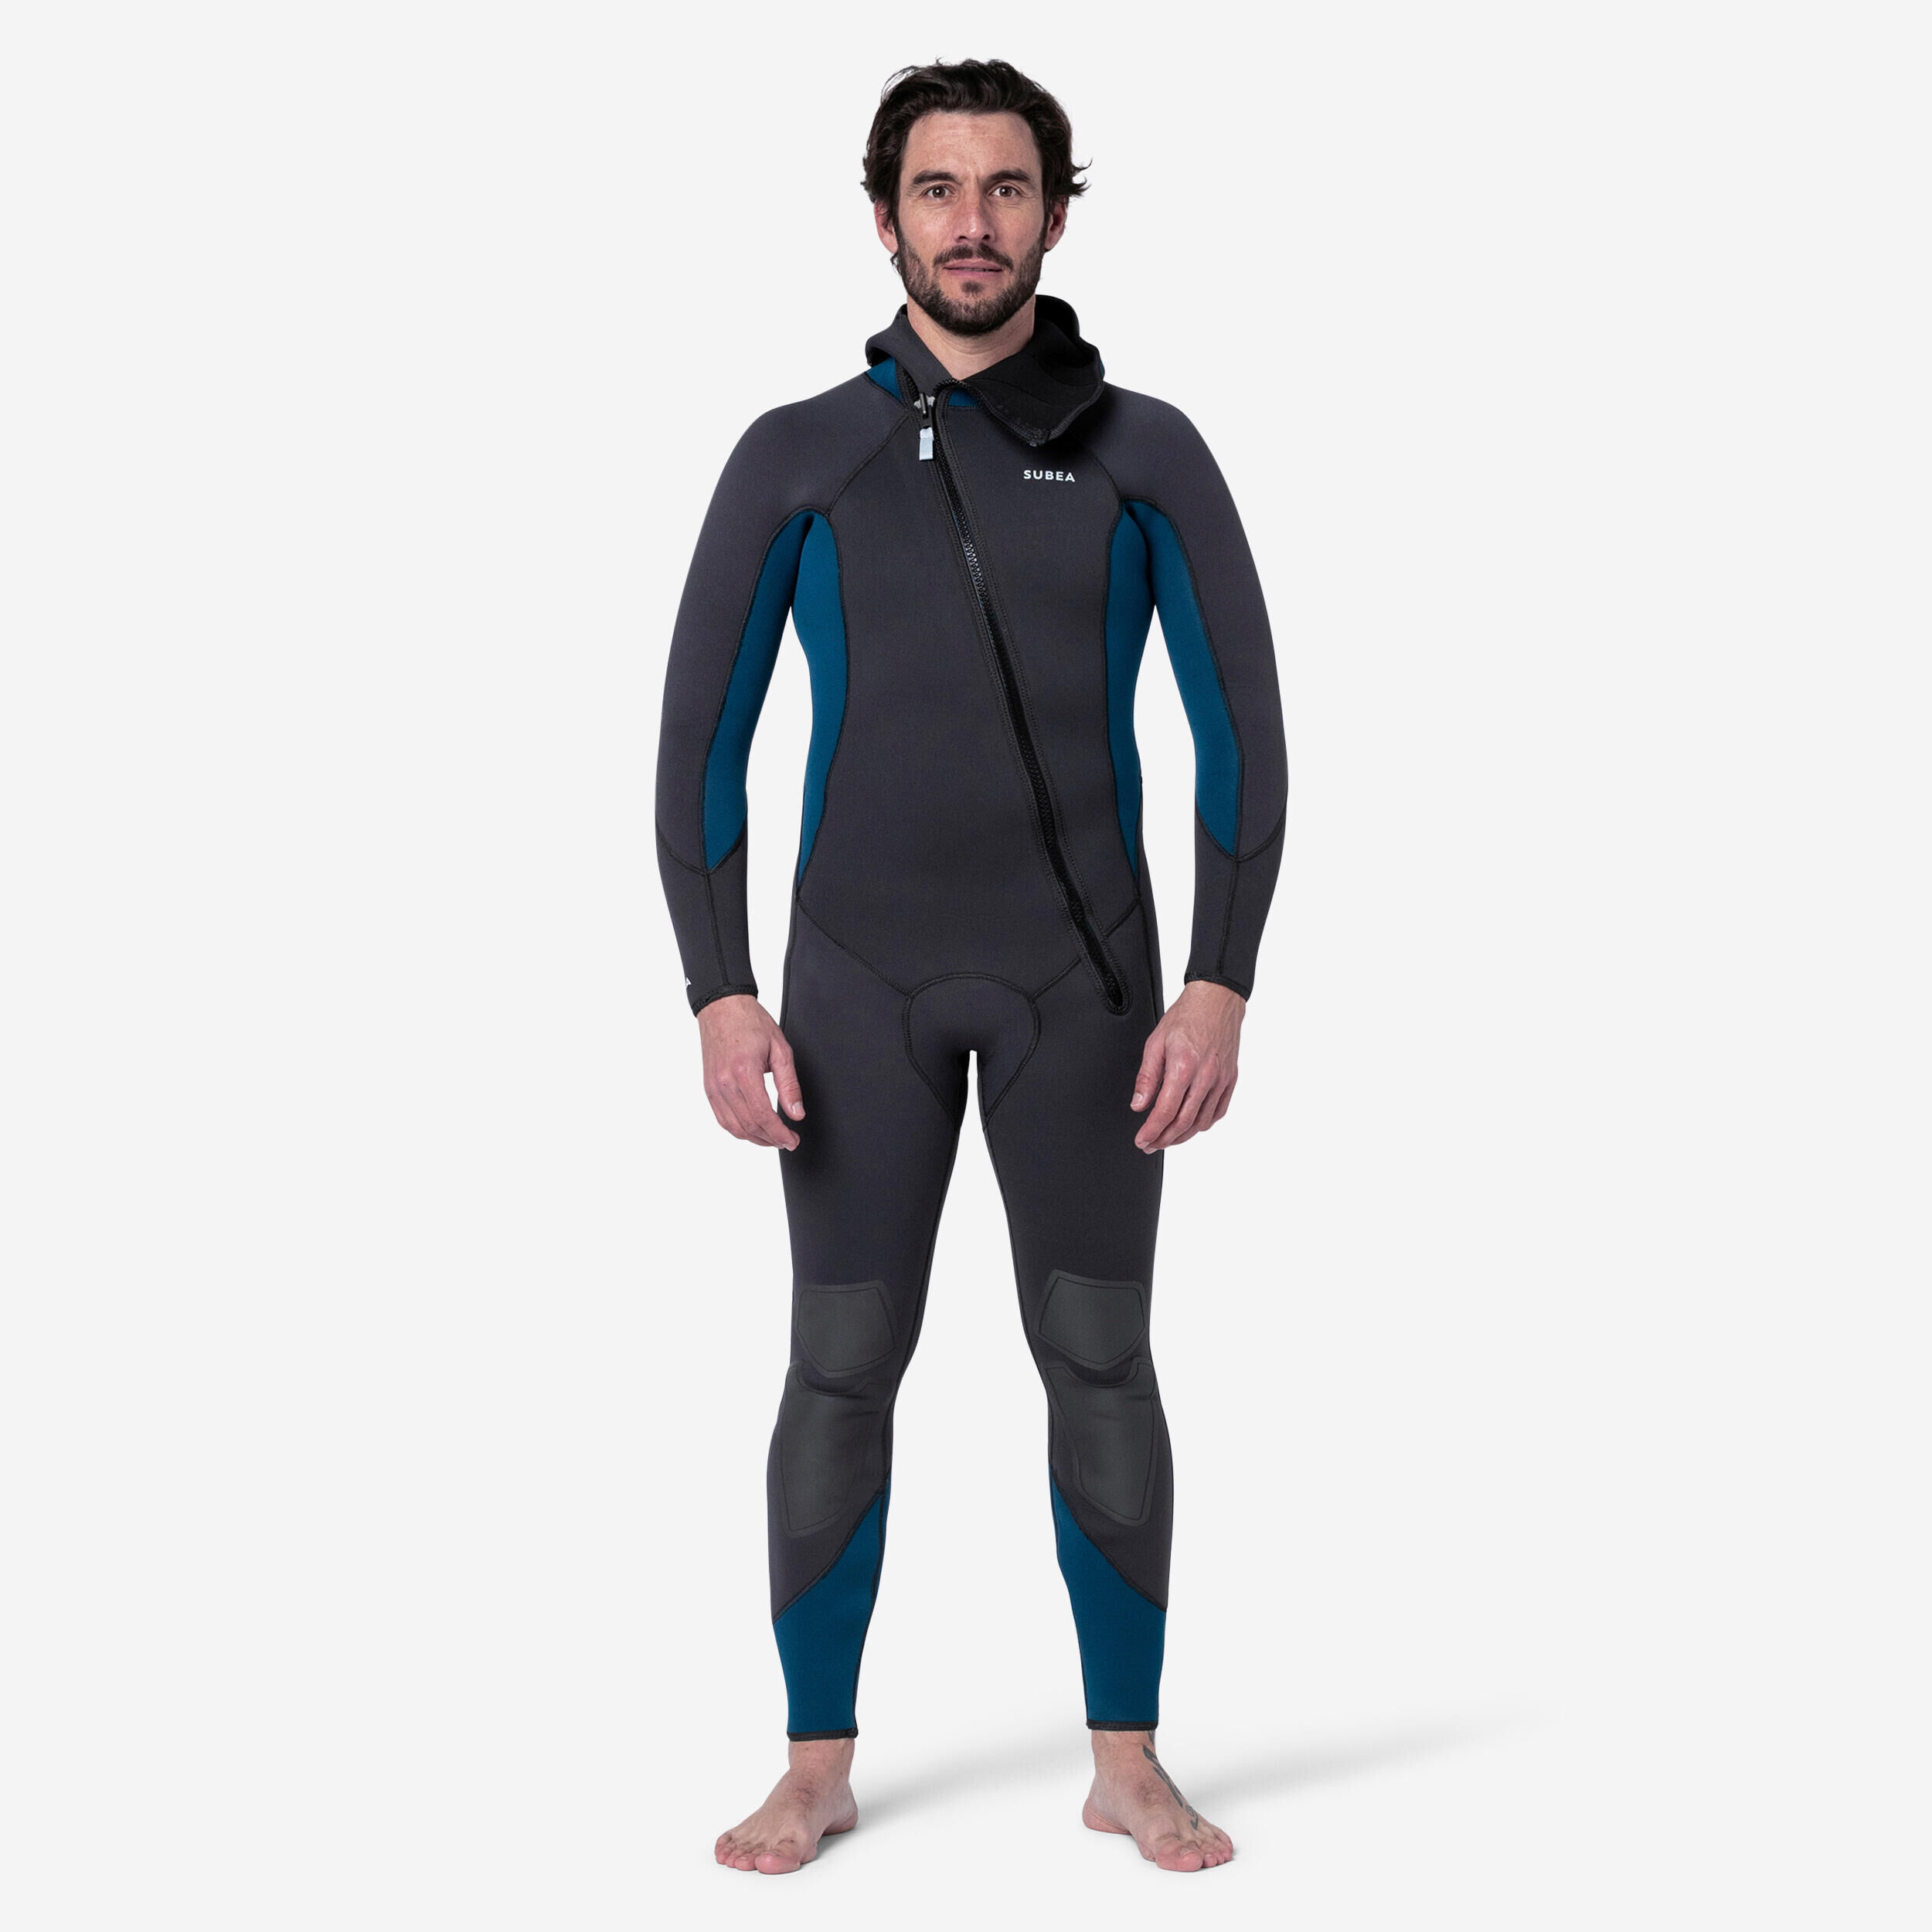 SUBEA Men's diving wetsuit 5 mm neoprene SCD 500 black and blue